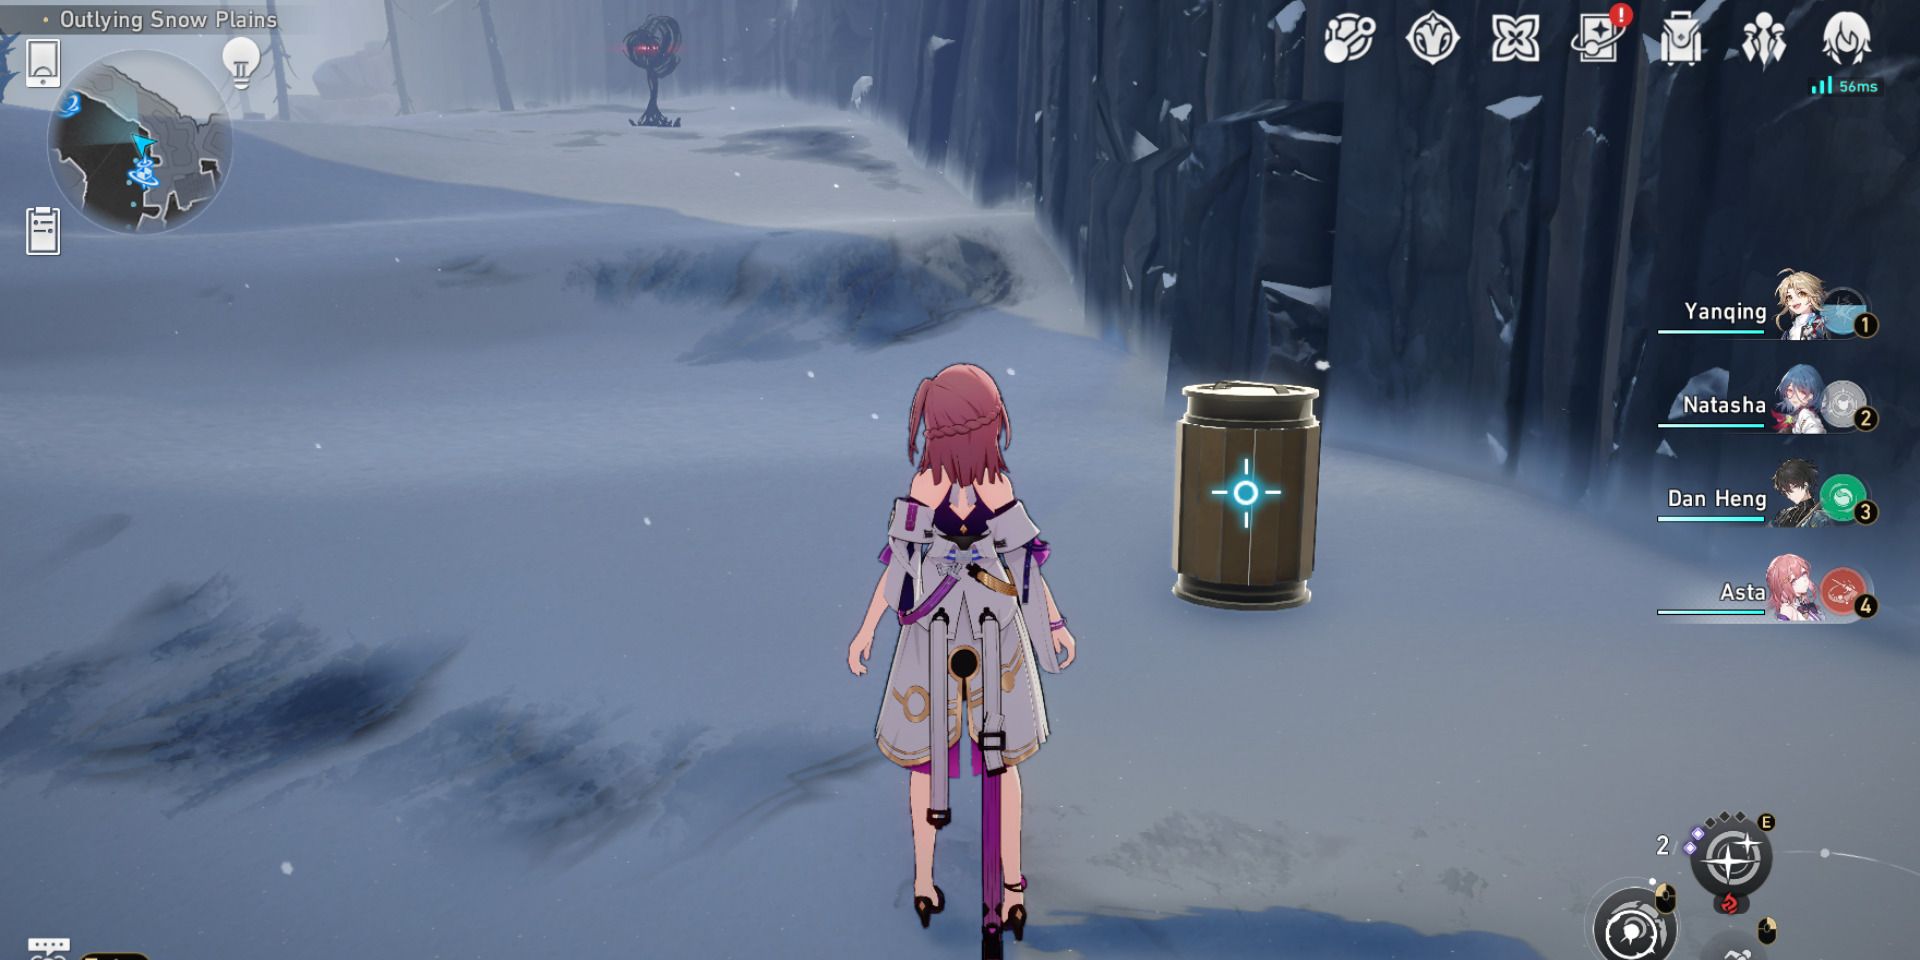 Image of Asta in front of a destructible object on the Honkai Star Train.